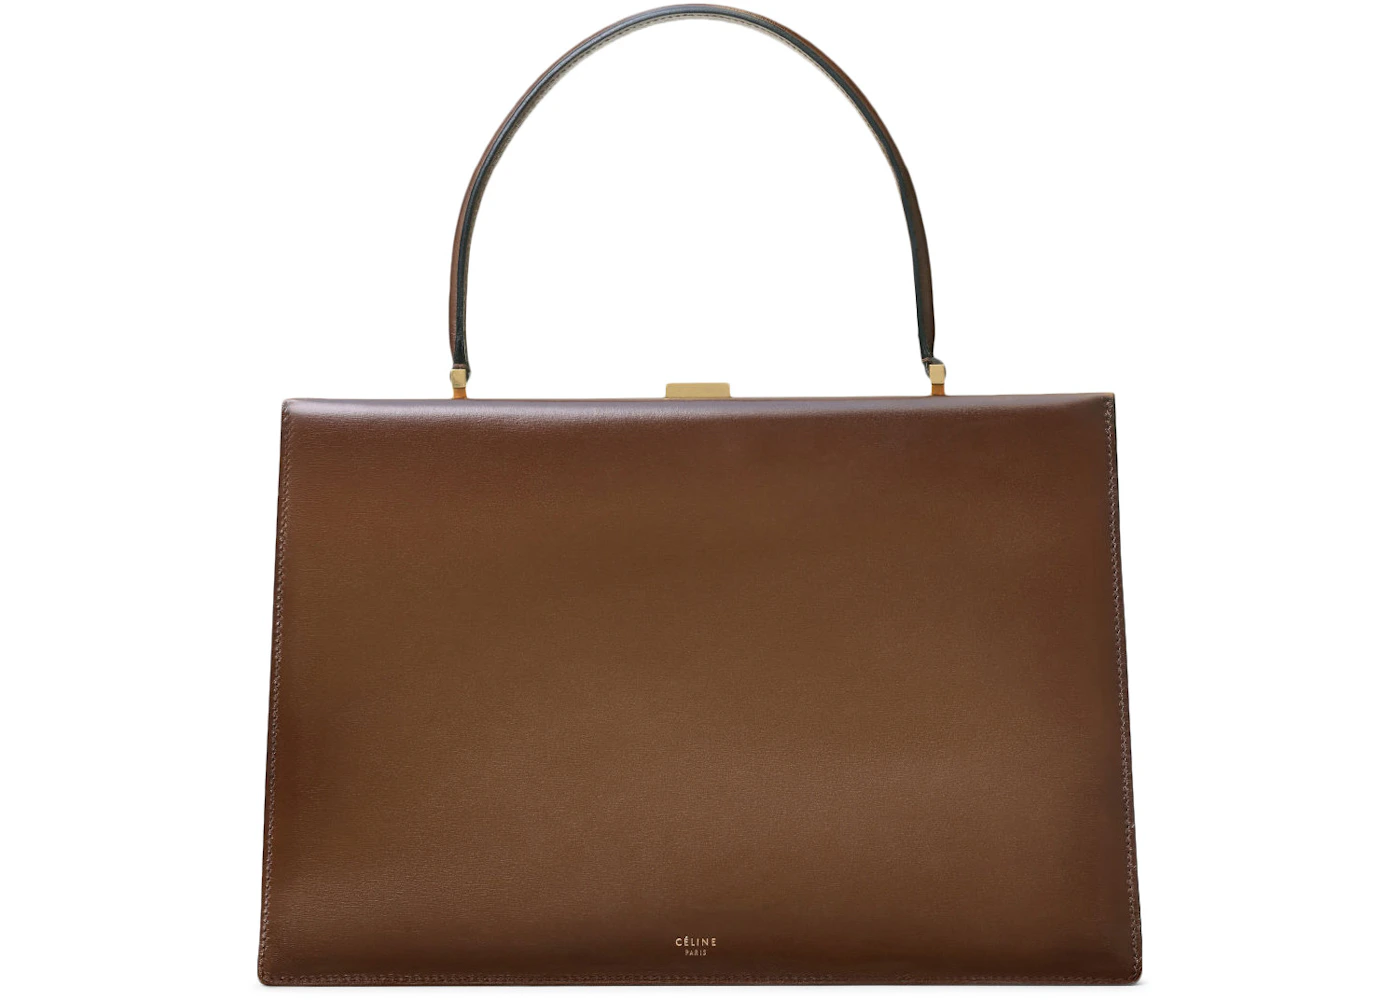 Celine Clasp Medium Camel in Calfskin/Patina with Gold-Tone - US